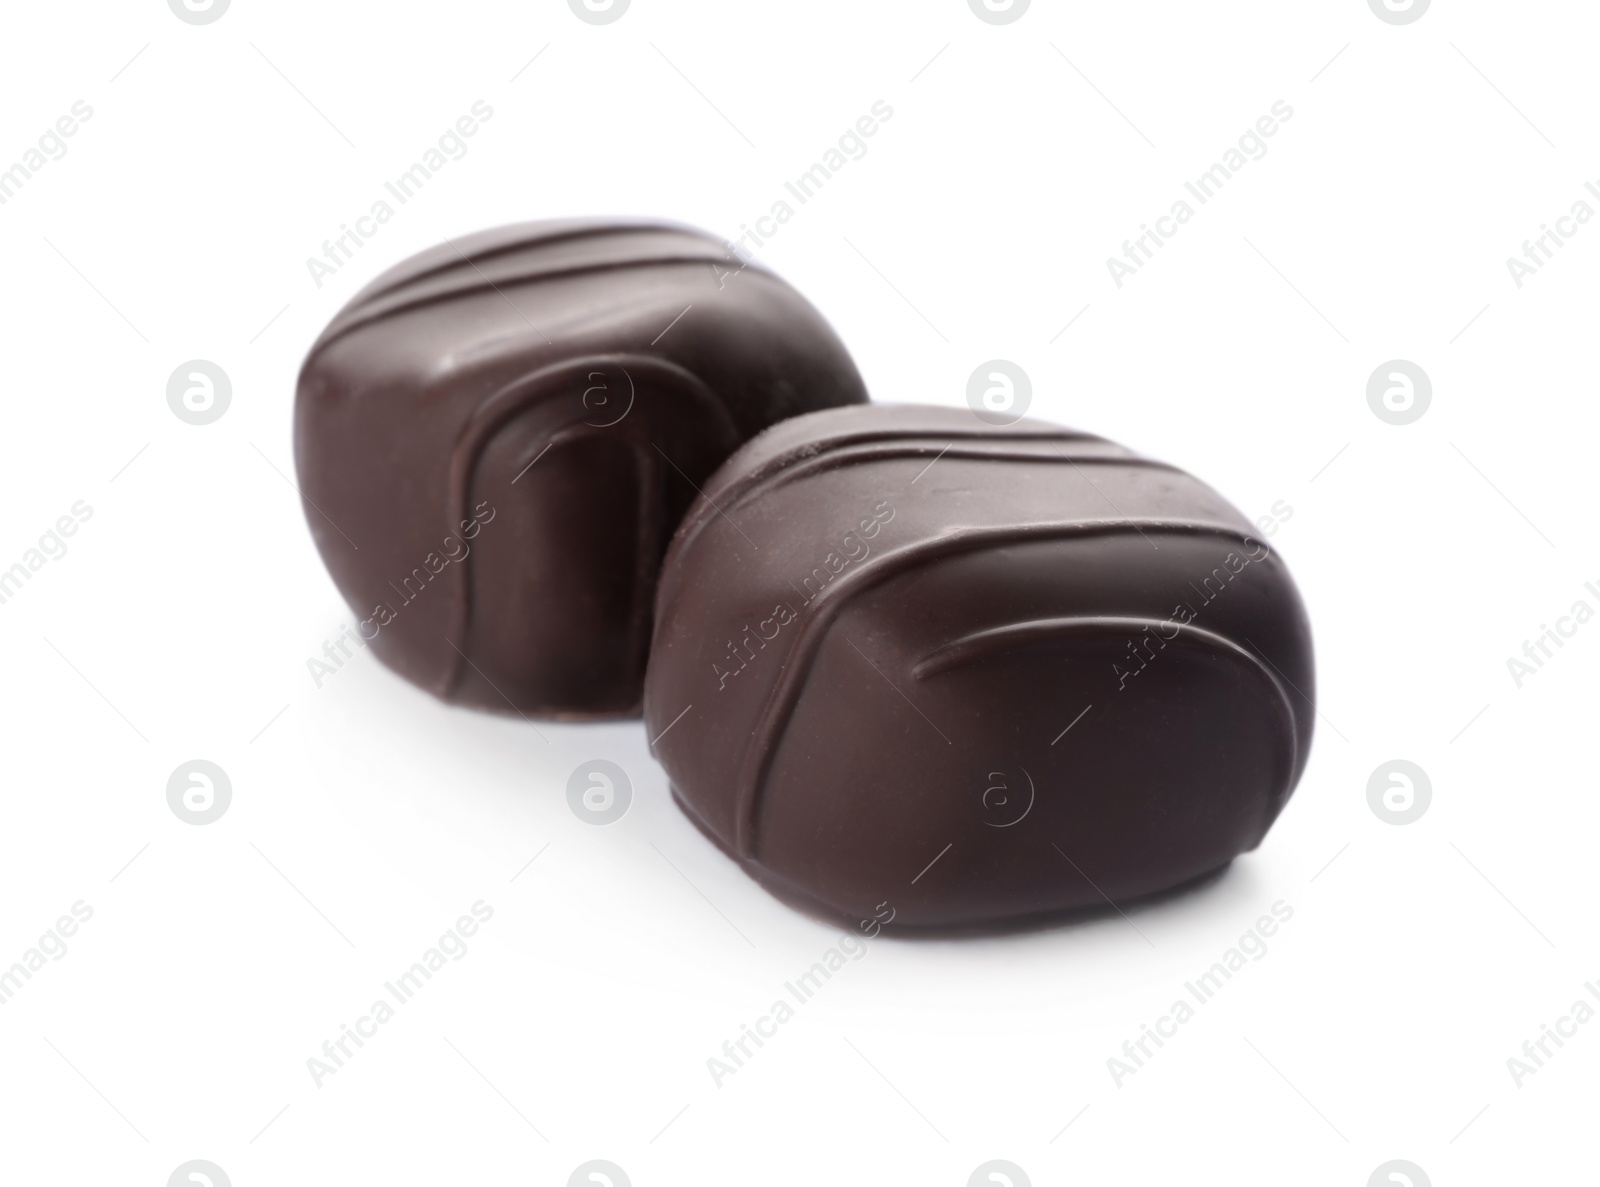 Photo of Delicious dark chocolate candies isolated on white